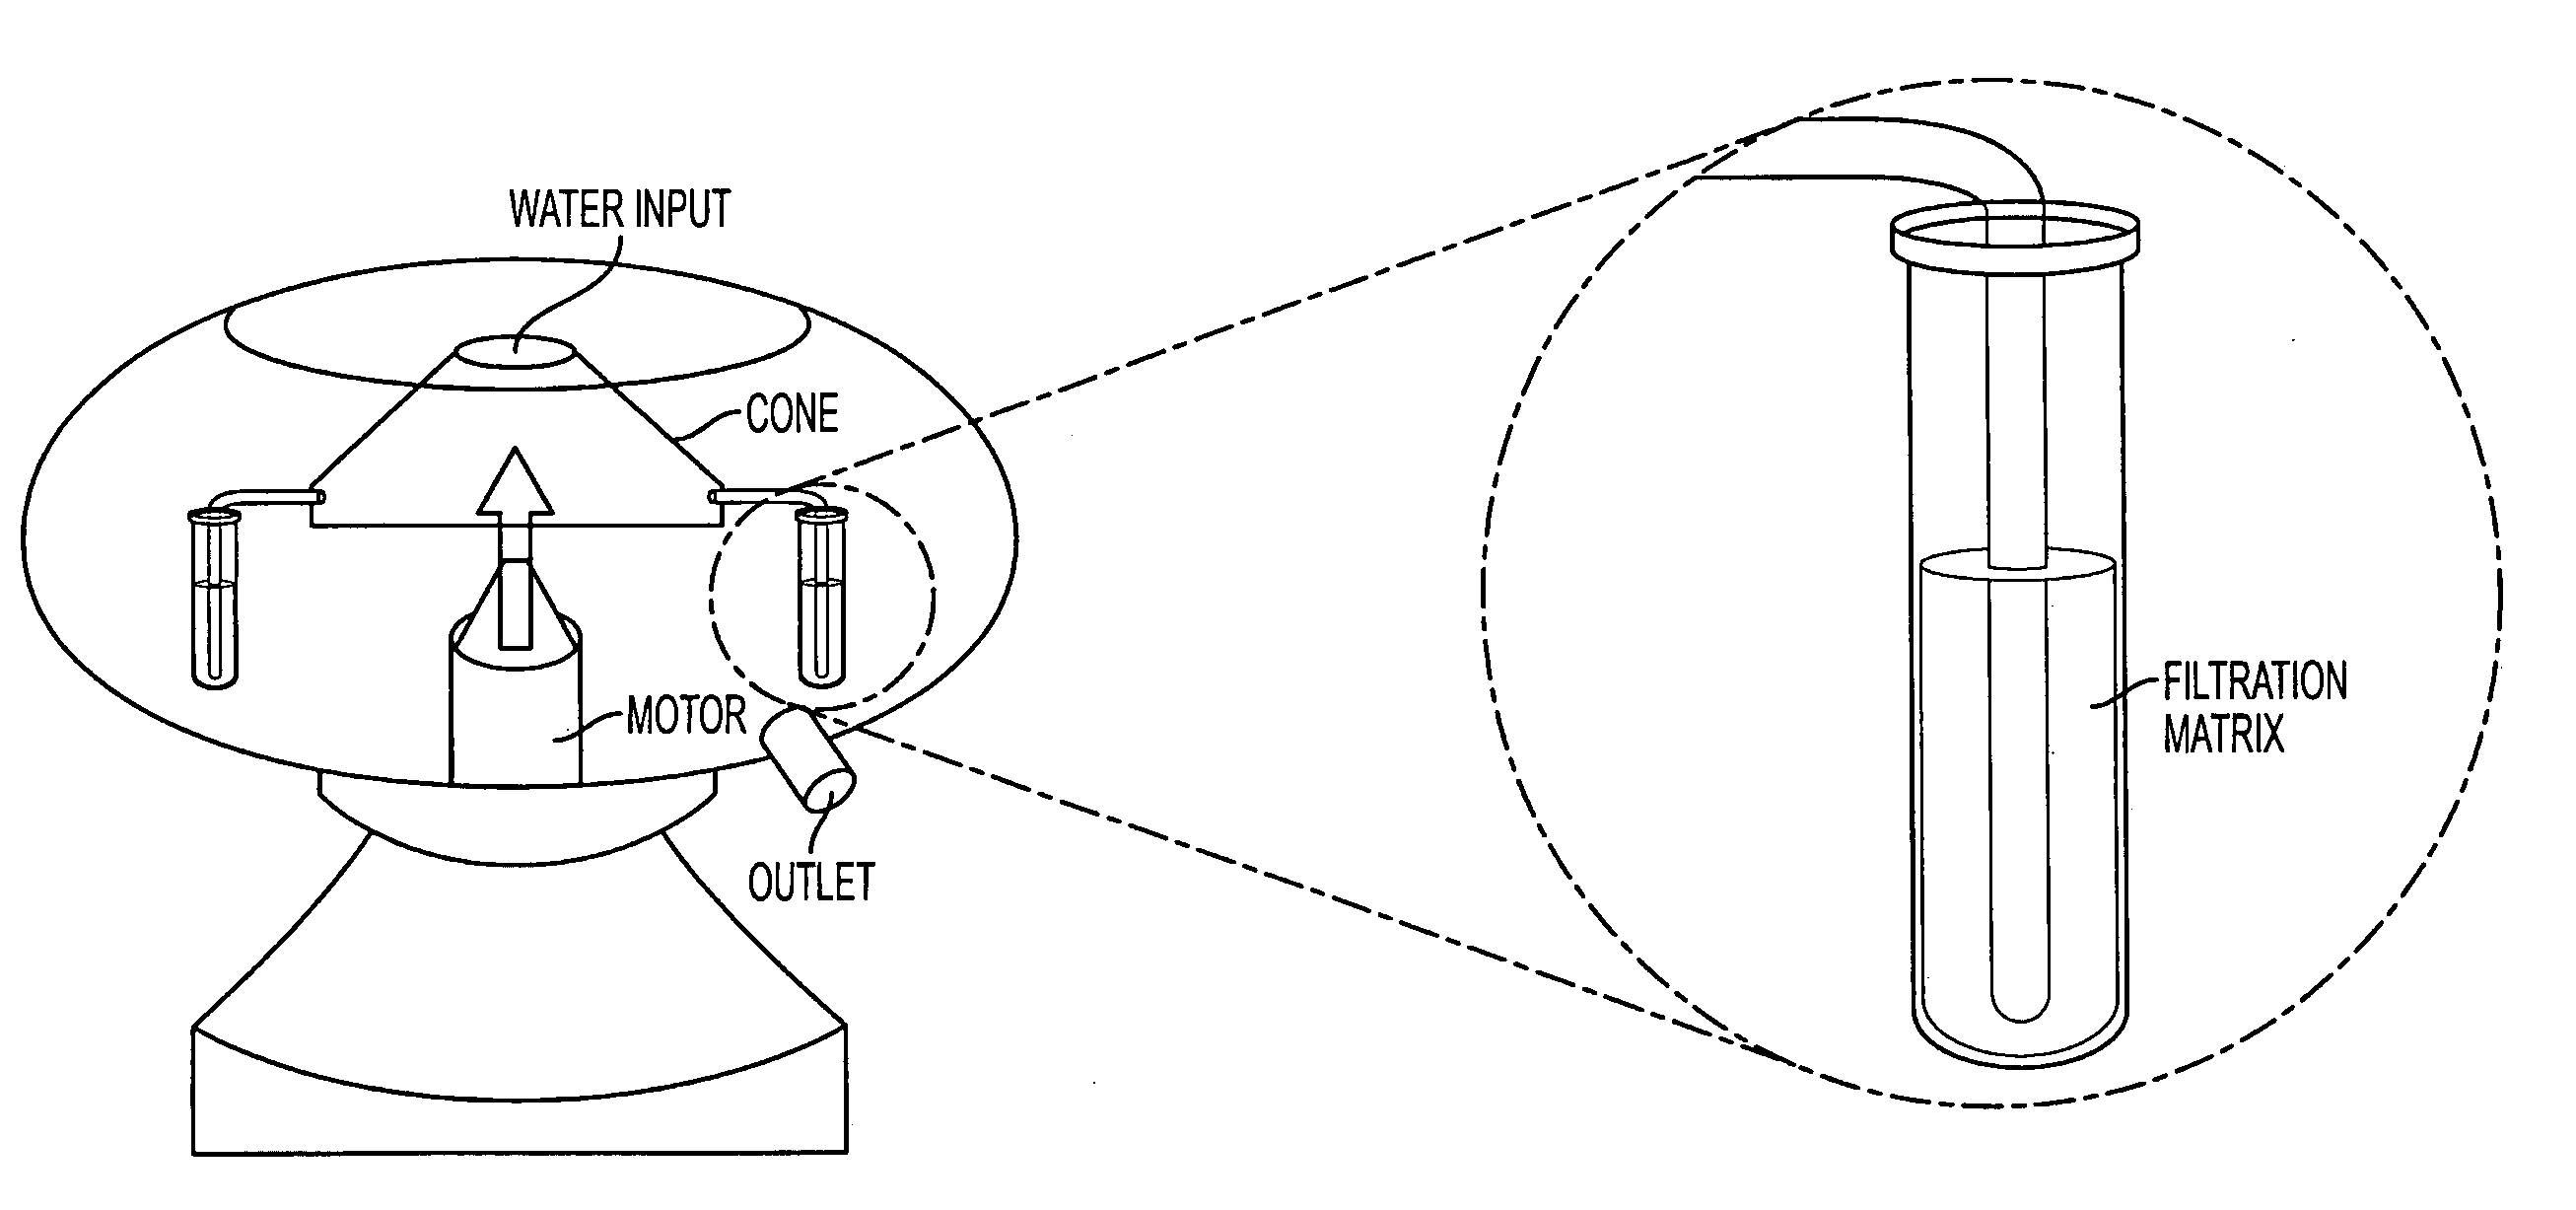 Apparatus for the separation of cystic parasite forms from water